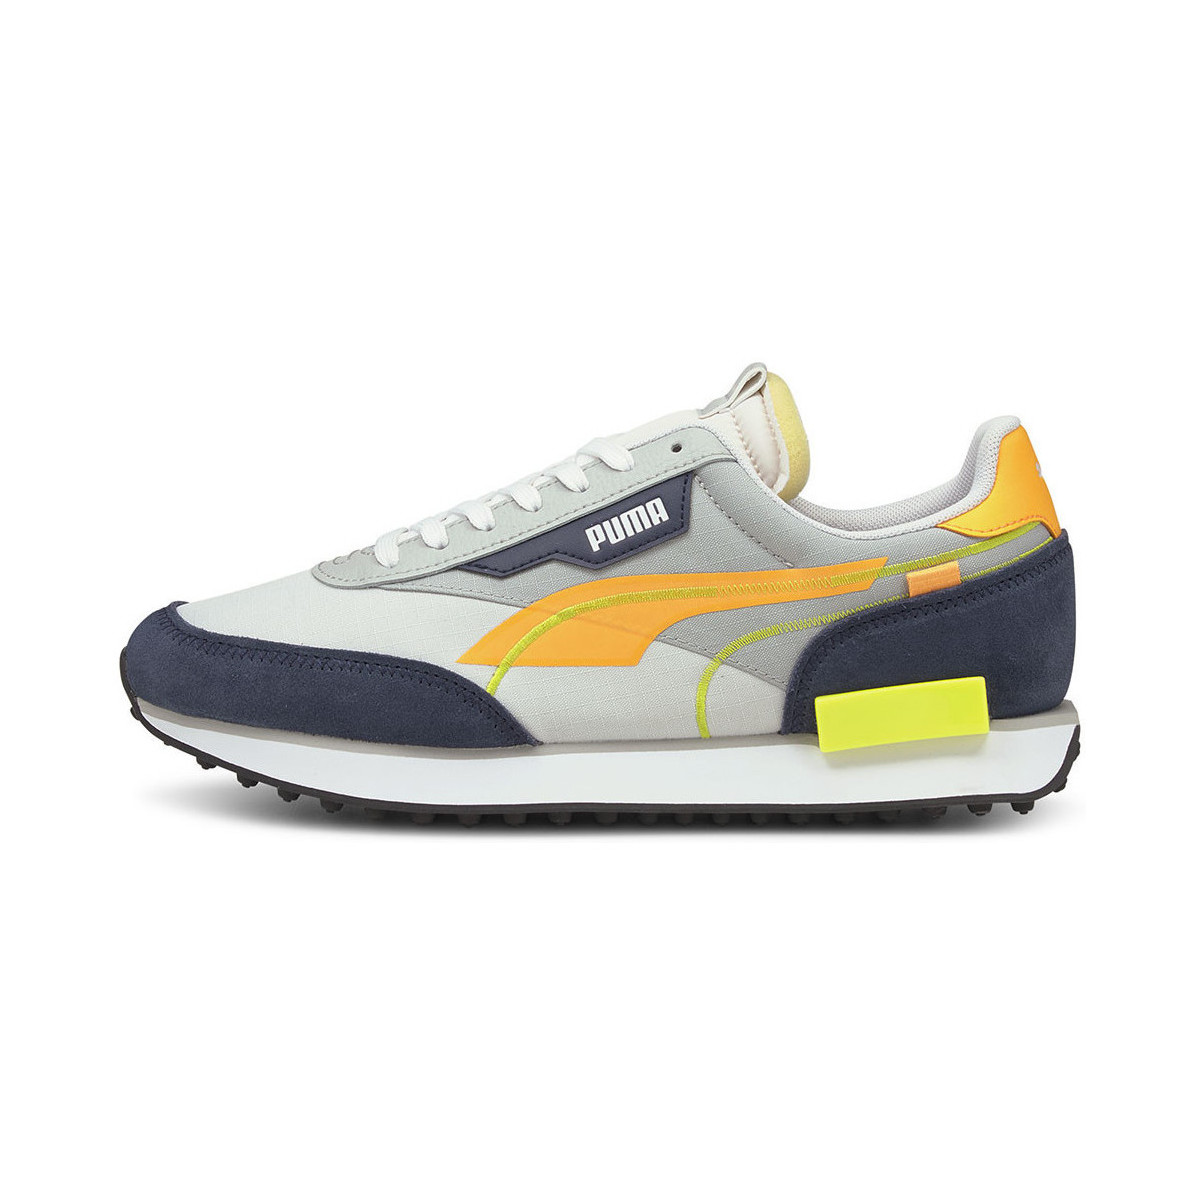 Chaussures Homme Baskets basses Puma FUTURE RIDER TWOFOLD SD Gris